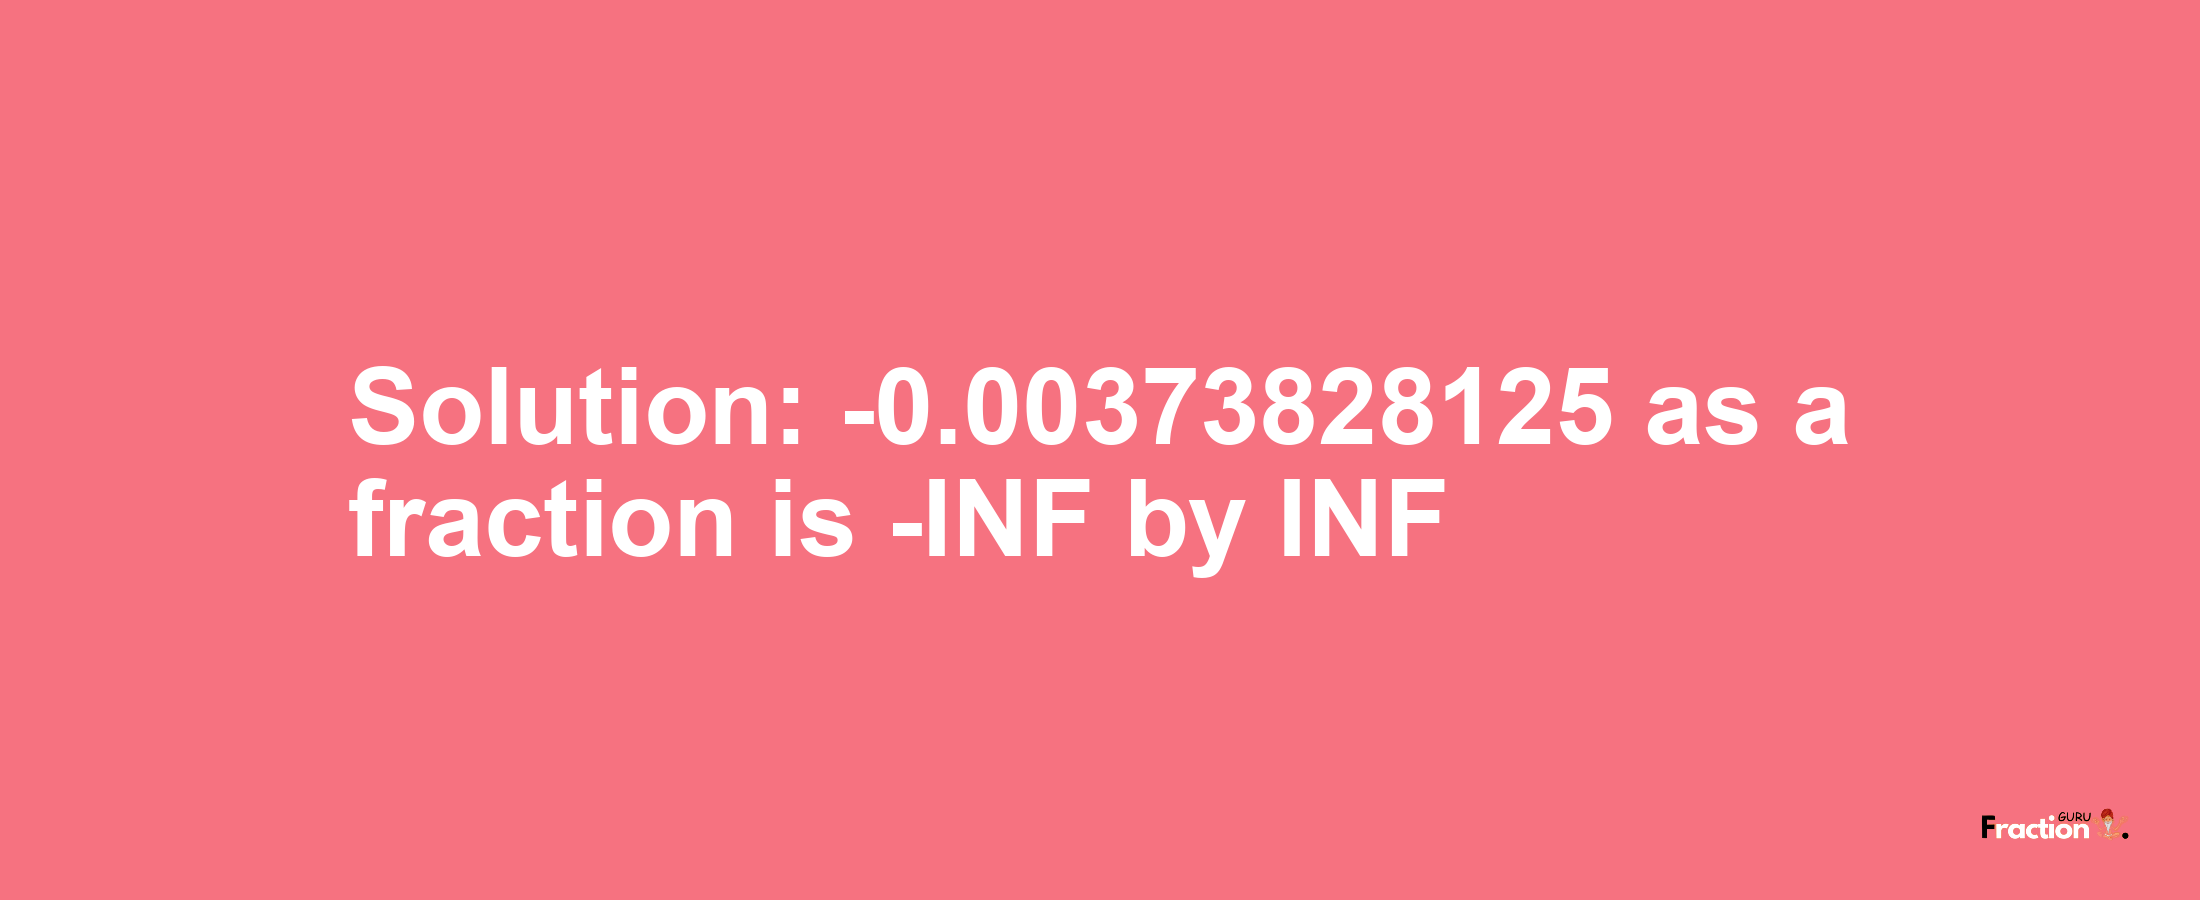 Solution:-0.00373828125 as a fraction is -INF/INF